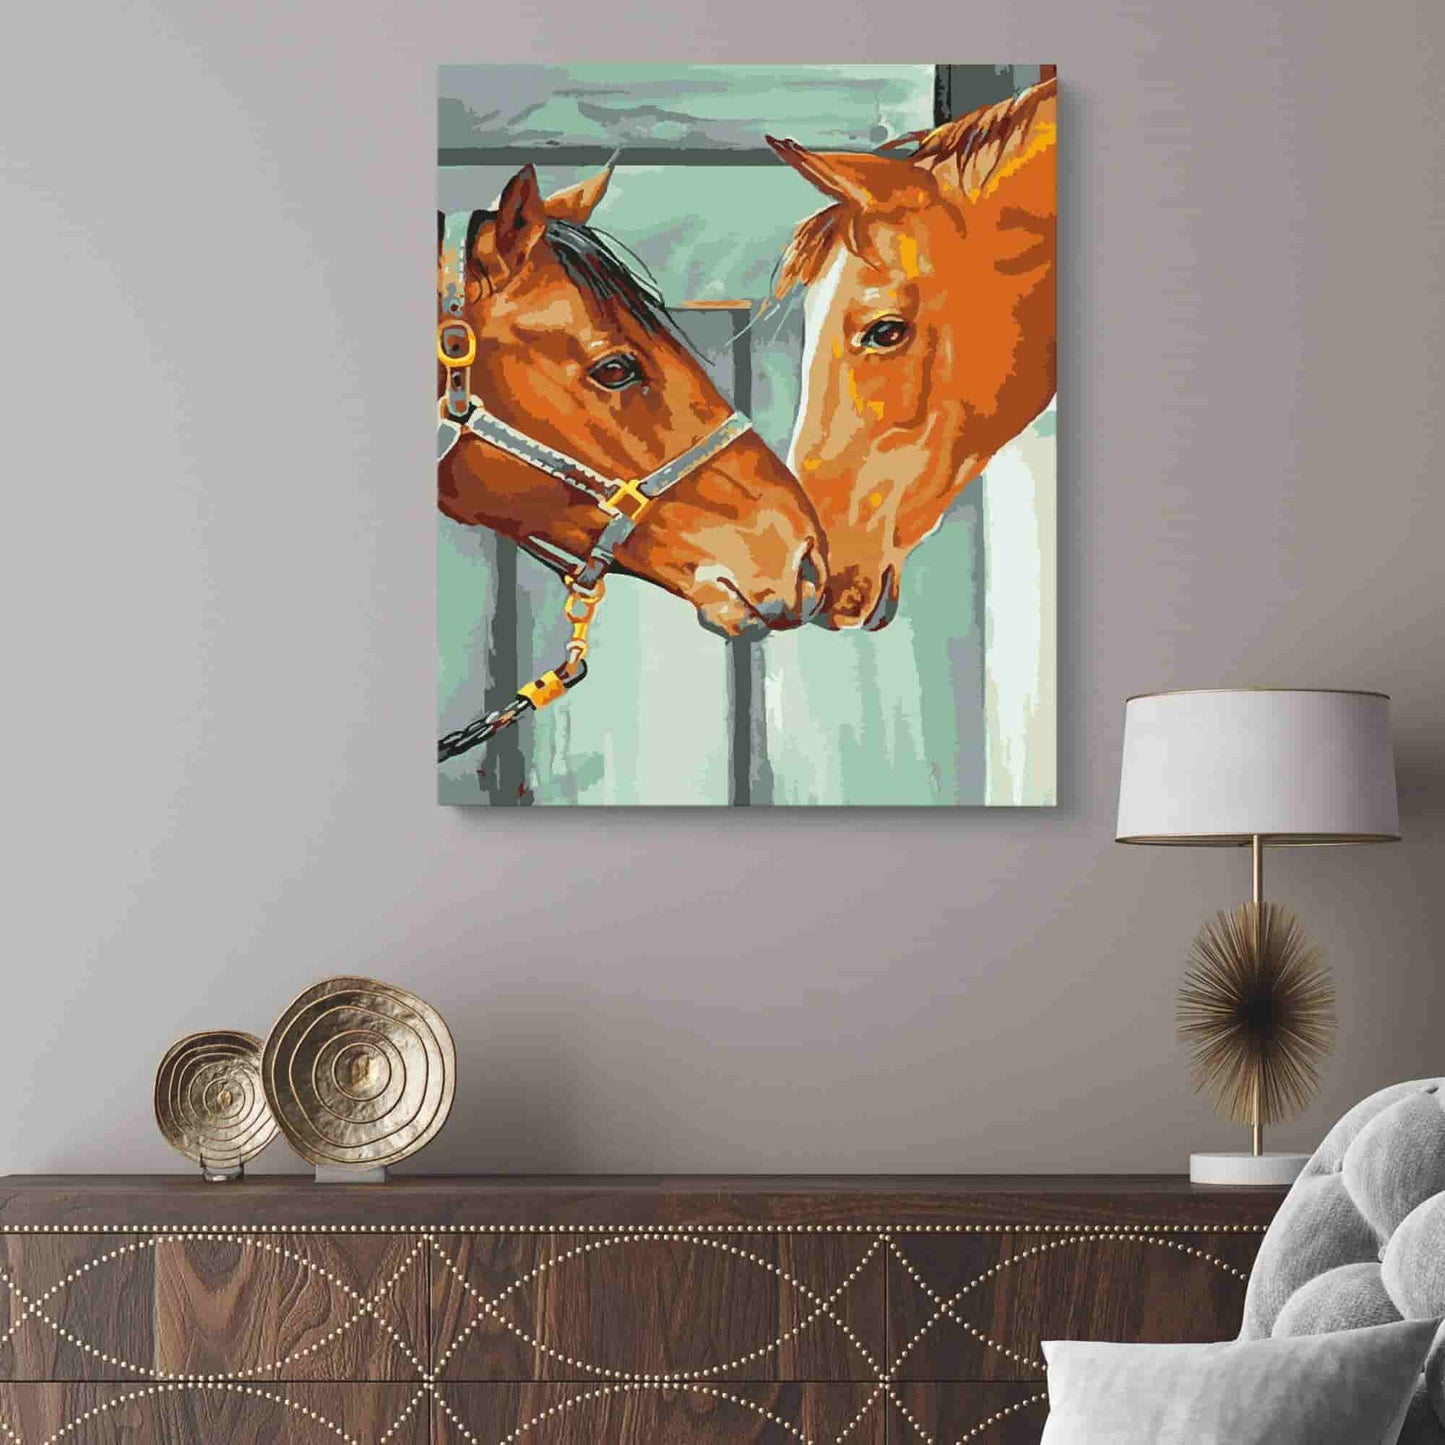 Two horses in the stable - Pintar Números ®